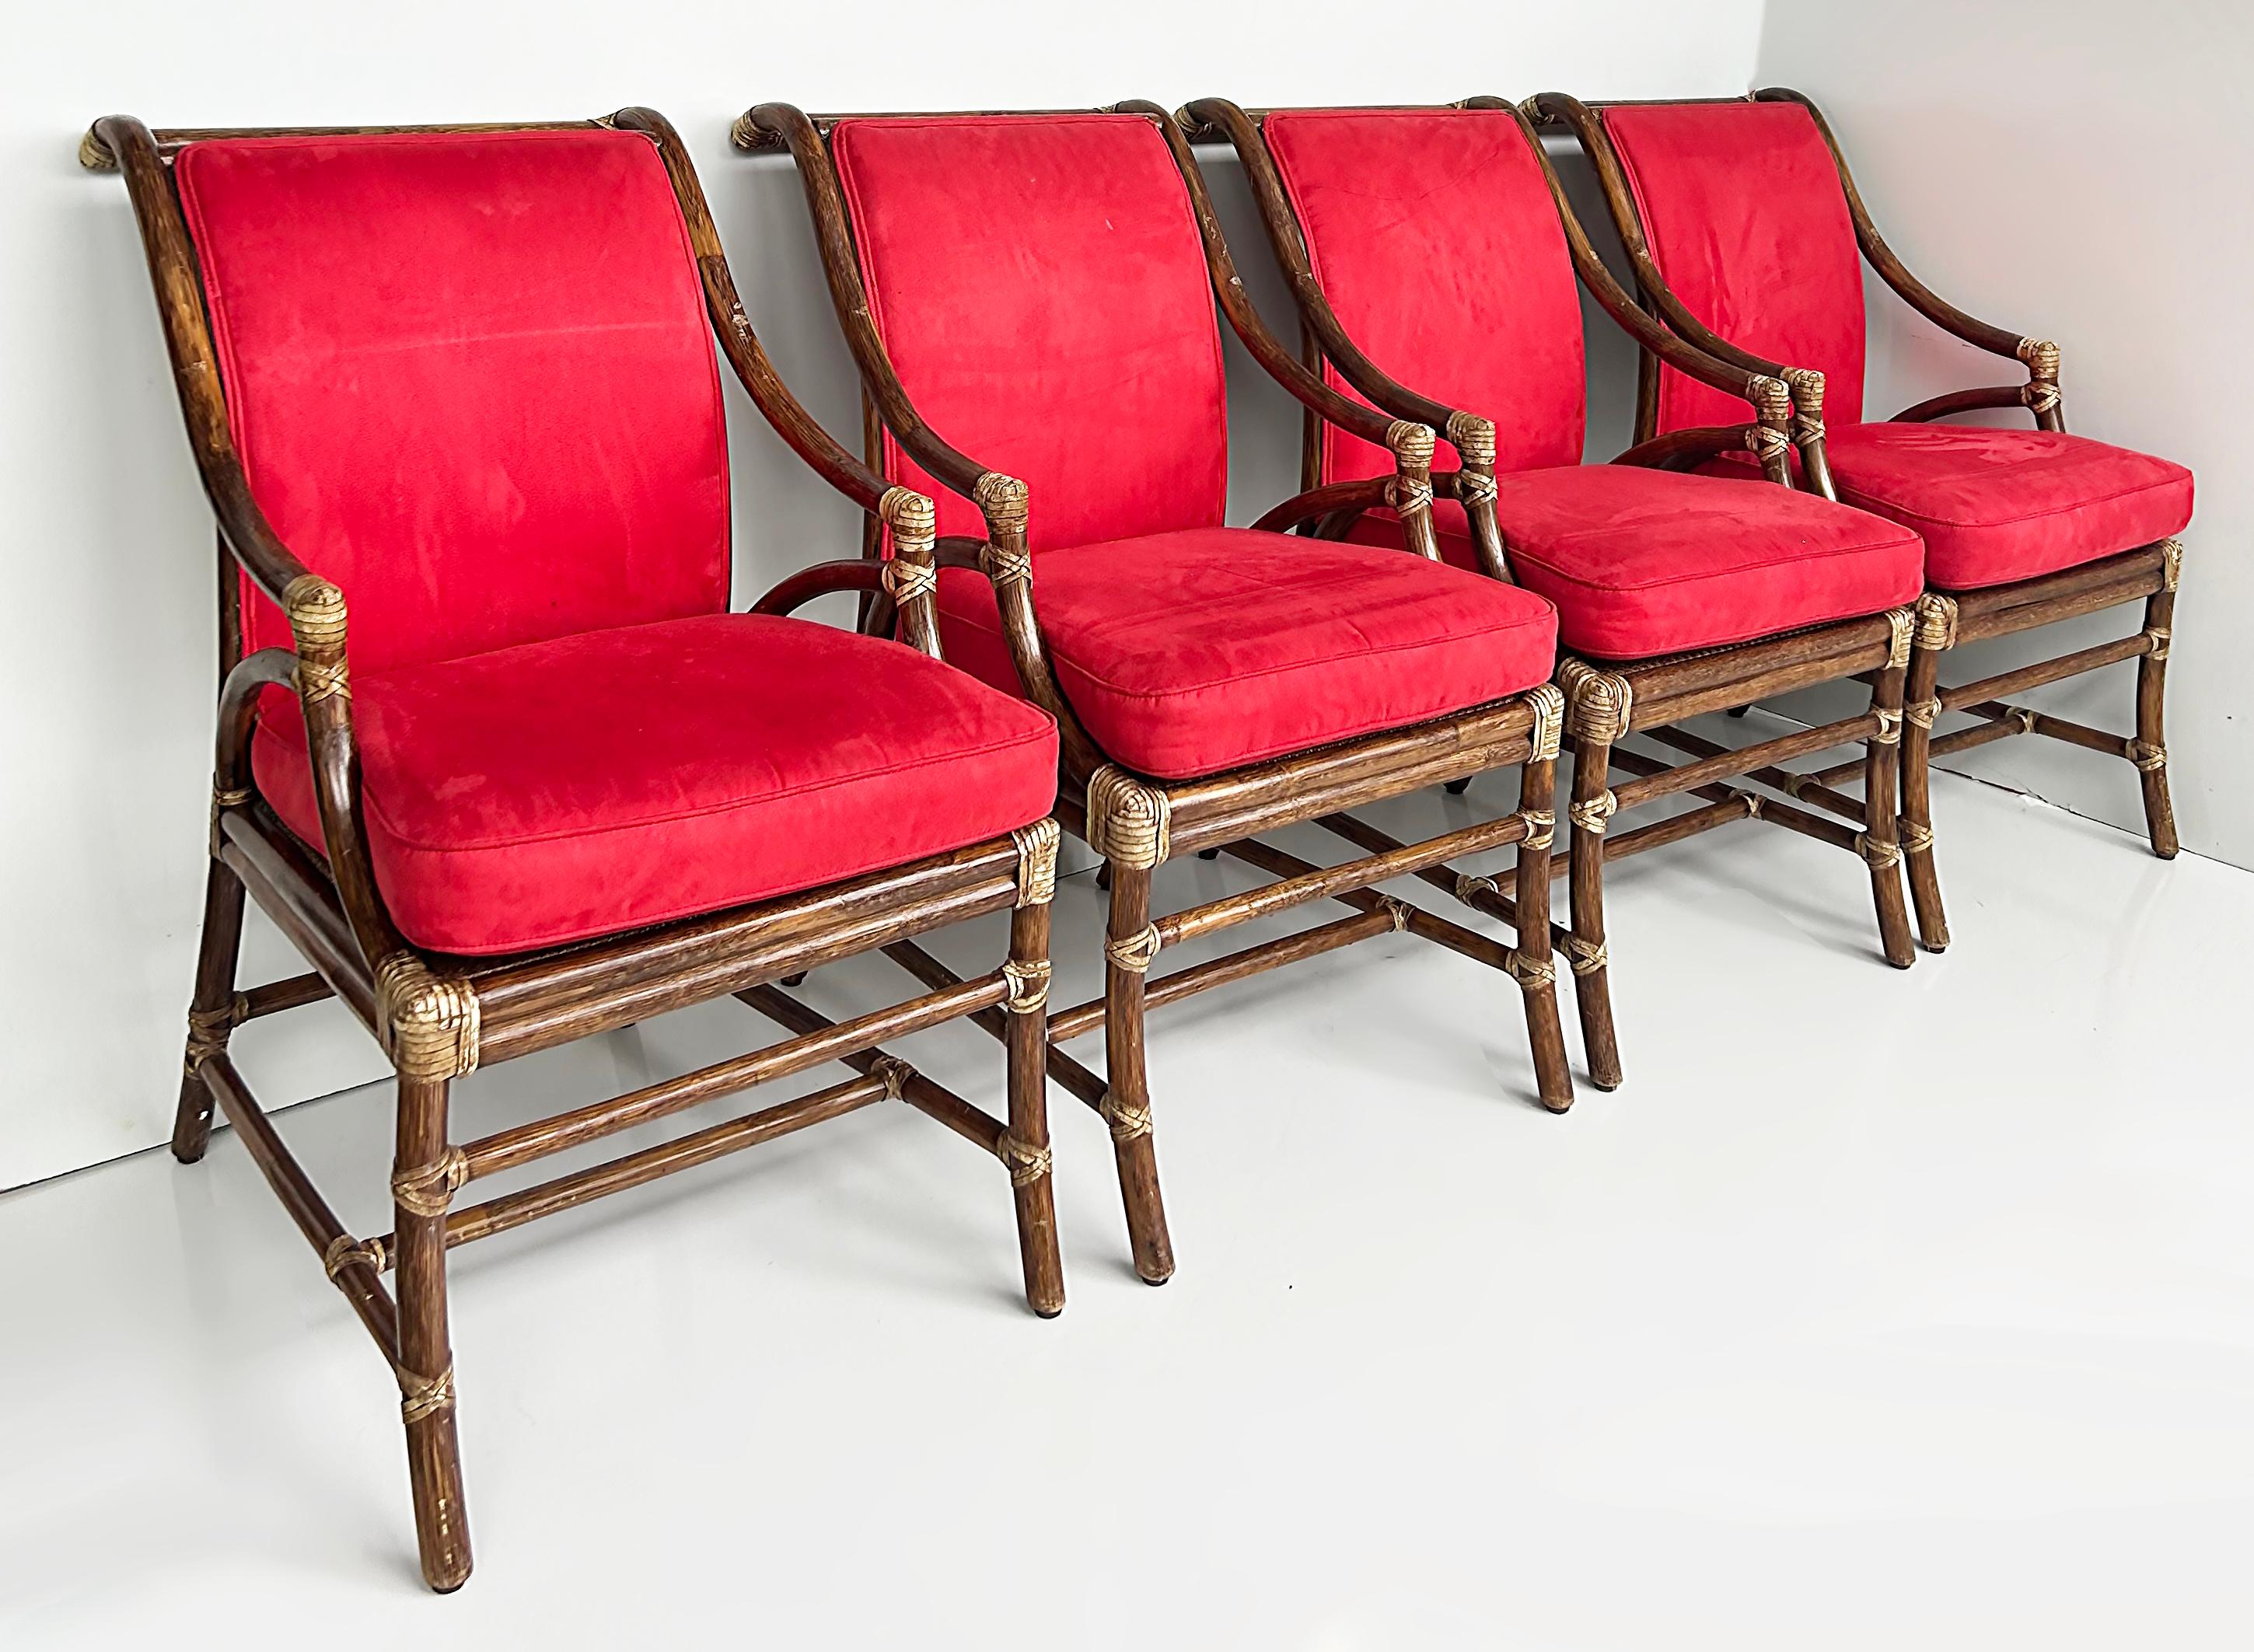 McGuire San Francisco Rattan, Cane and Rawhide Armchairs, Set of 4

Offered for sale is a set of four vintage McGuire San Francisco rattan dining armchairs. The chairs have woven cane seats that are in good condition with no issues and also have